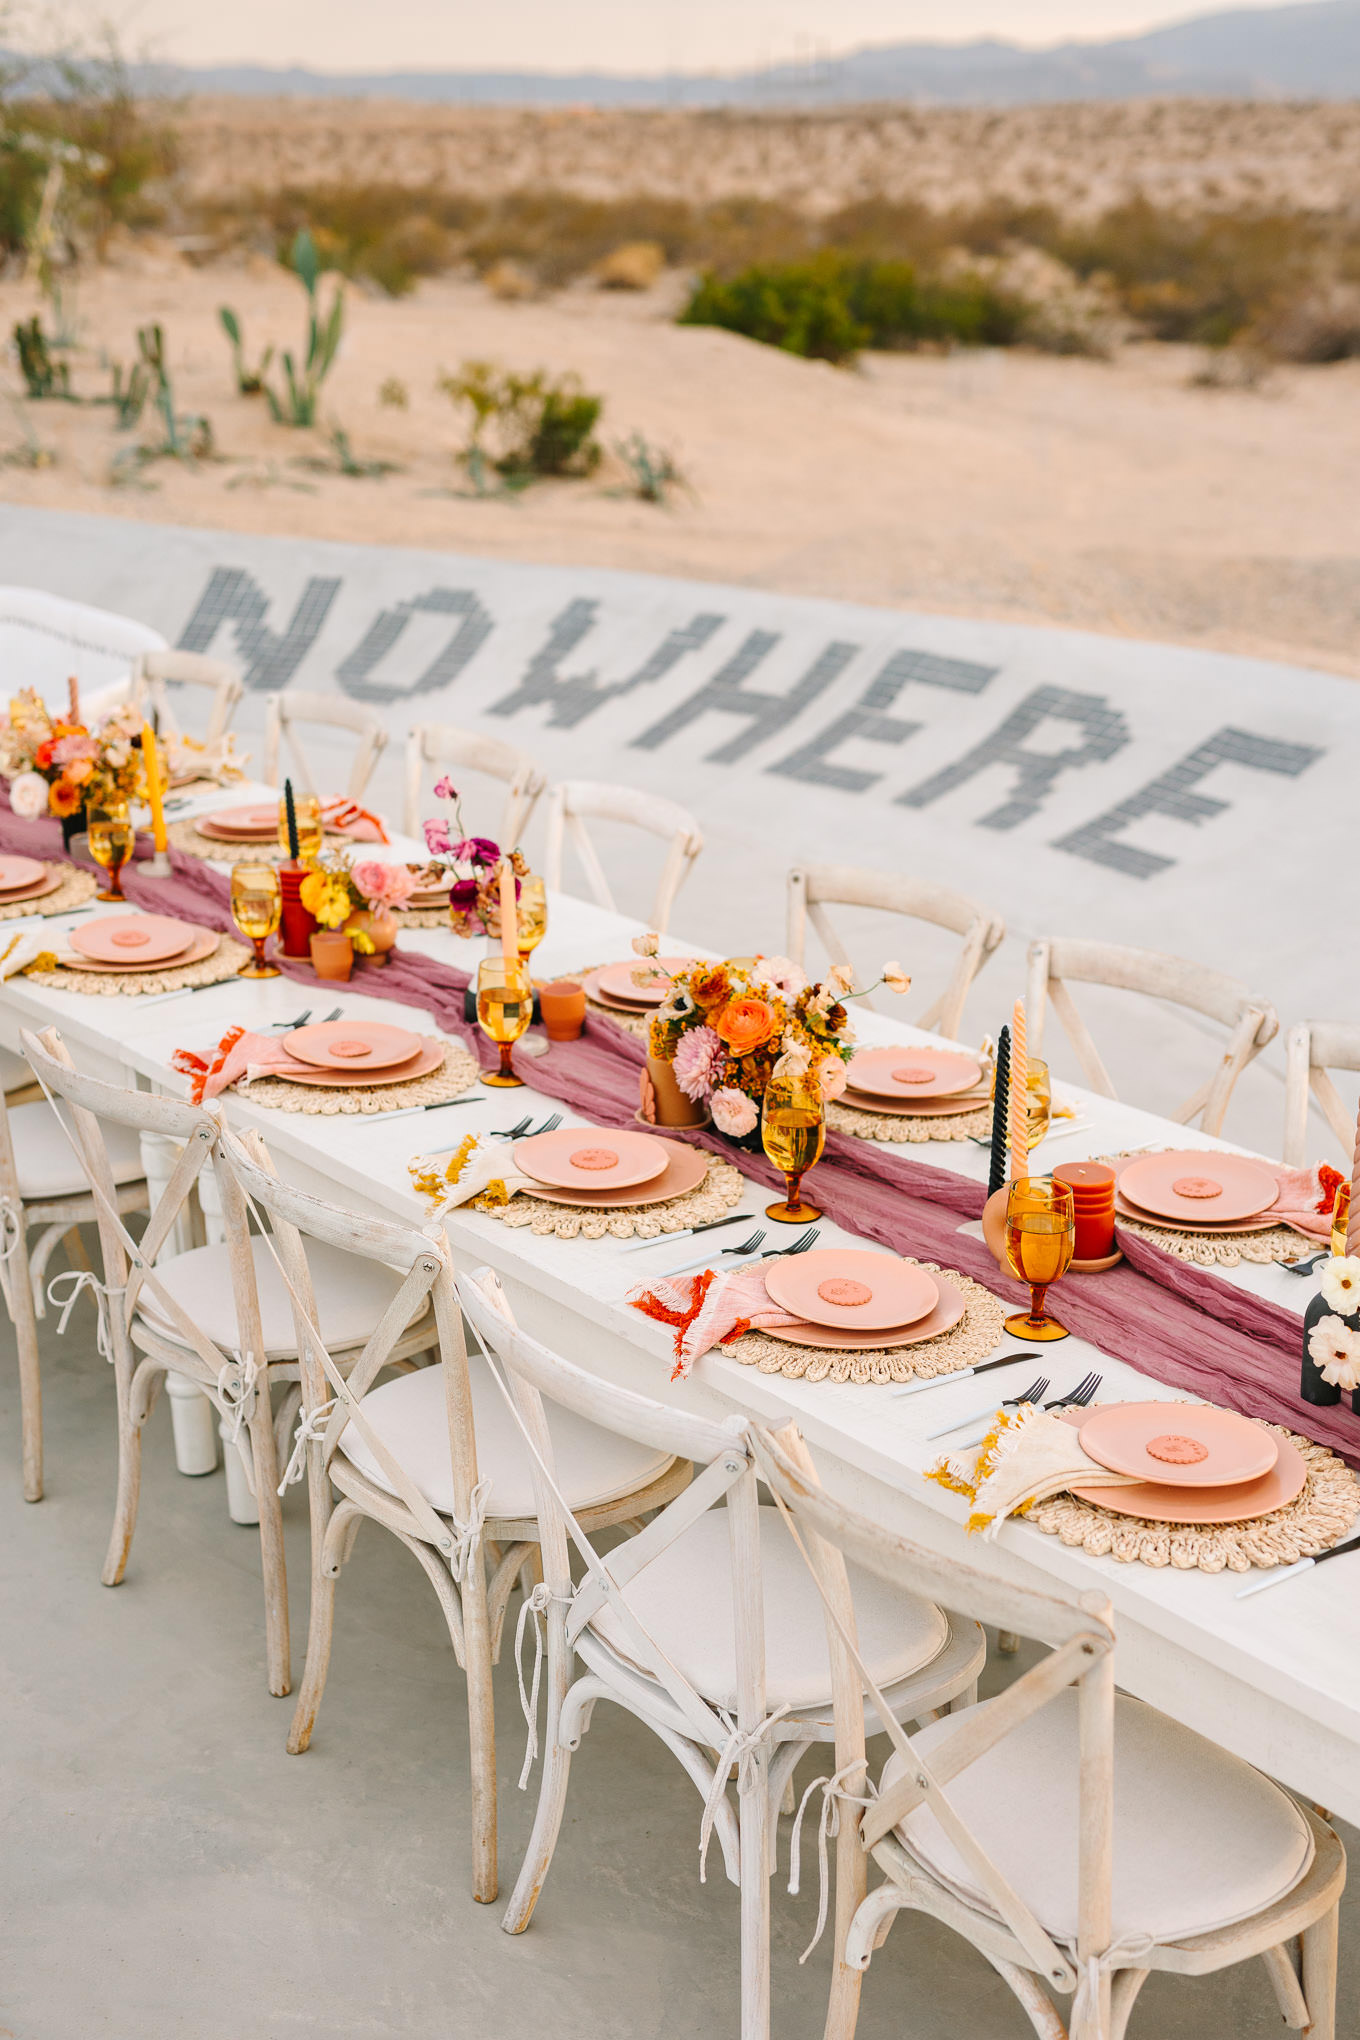 Nowhere Joshua Tree wedding | Wedding and elopement photography roundup | Los Angeles and Palm Springs photographer | #losangeleswedding #palmspringswedding #elopementphotographer Source: Mary Costa Photography | Los Angeles